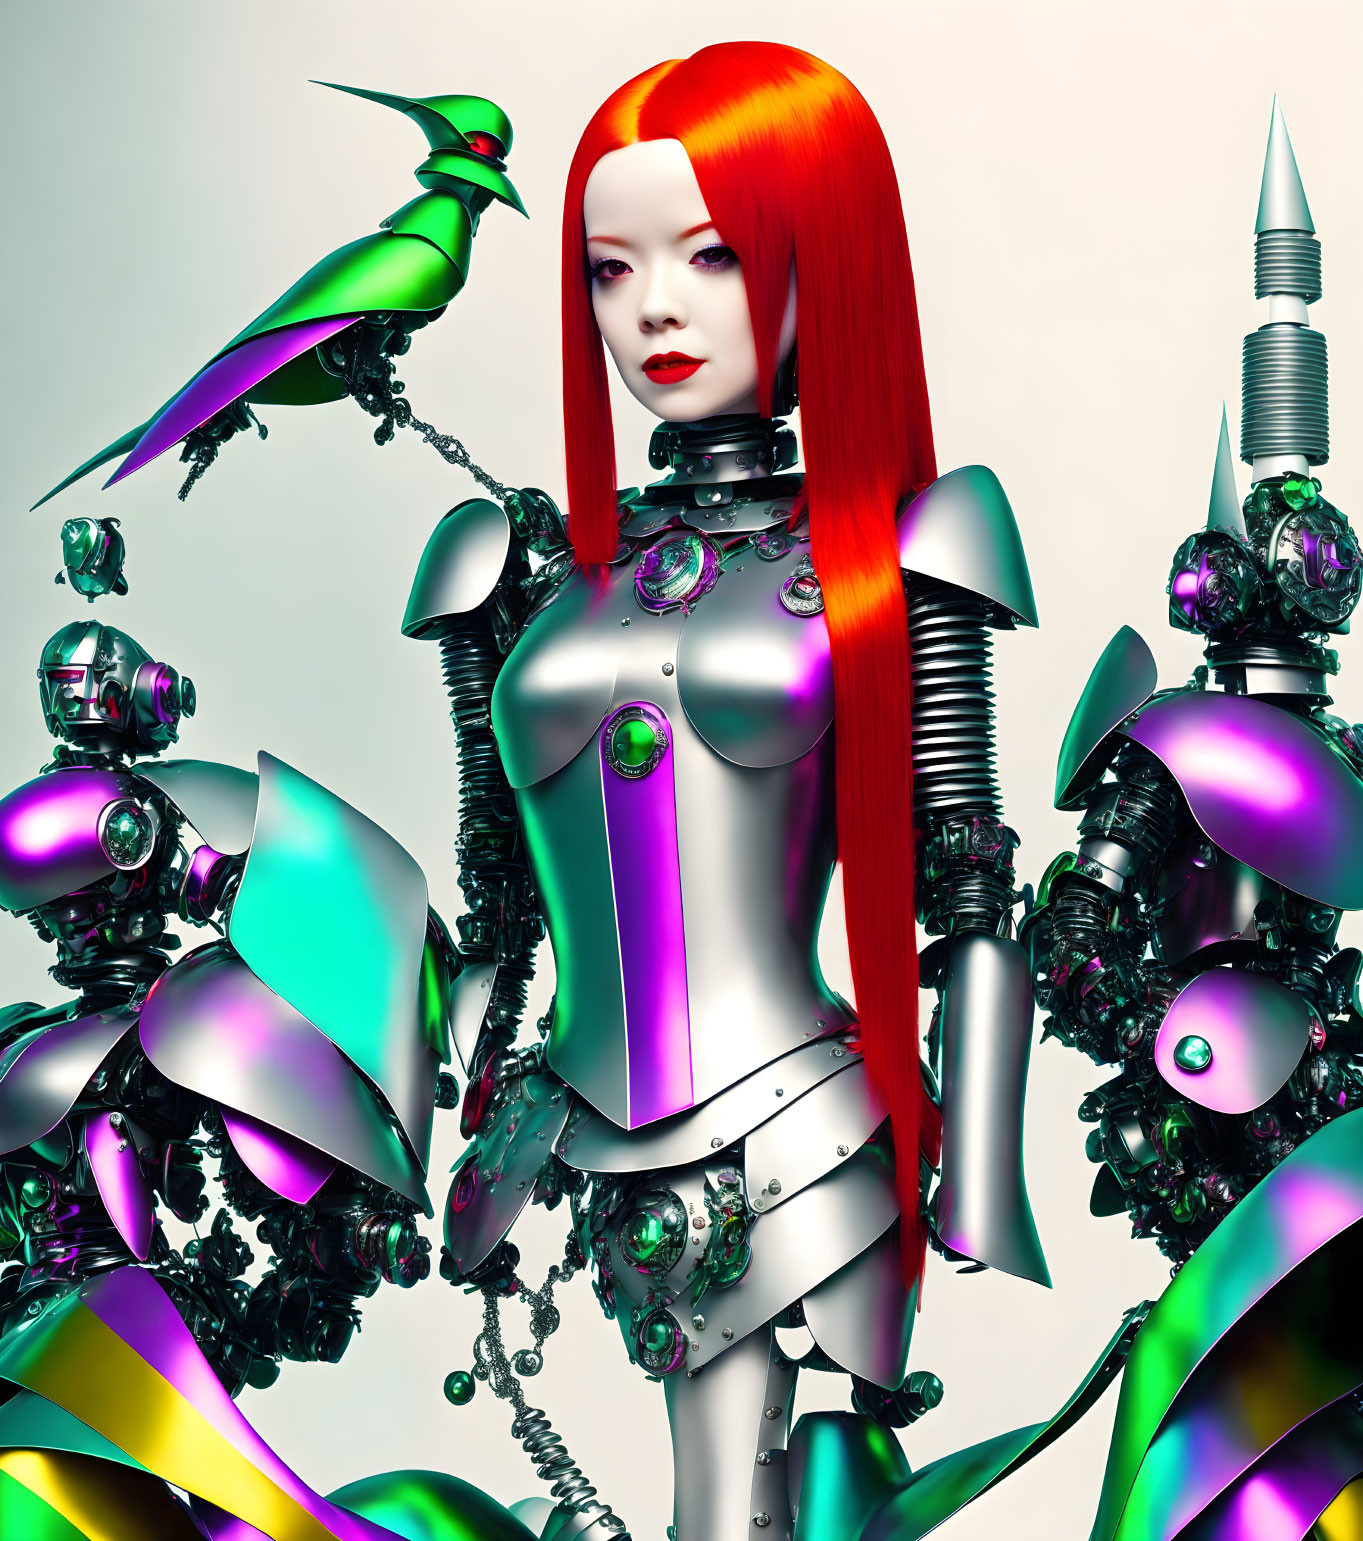 Futuristic female android with red hair in metallic armor